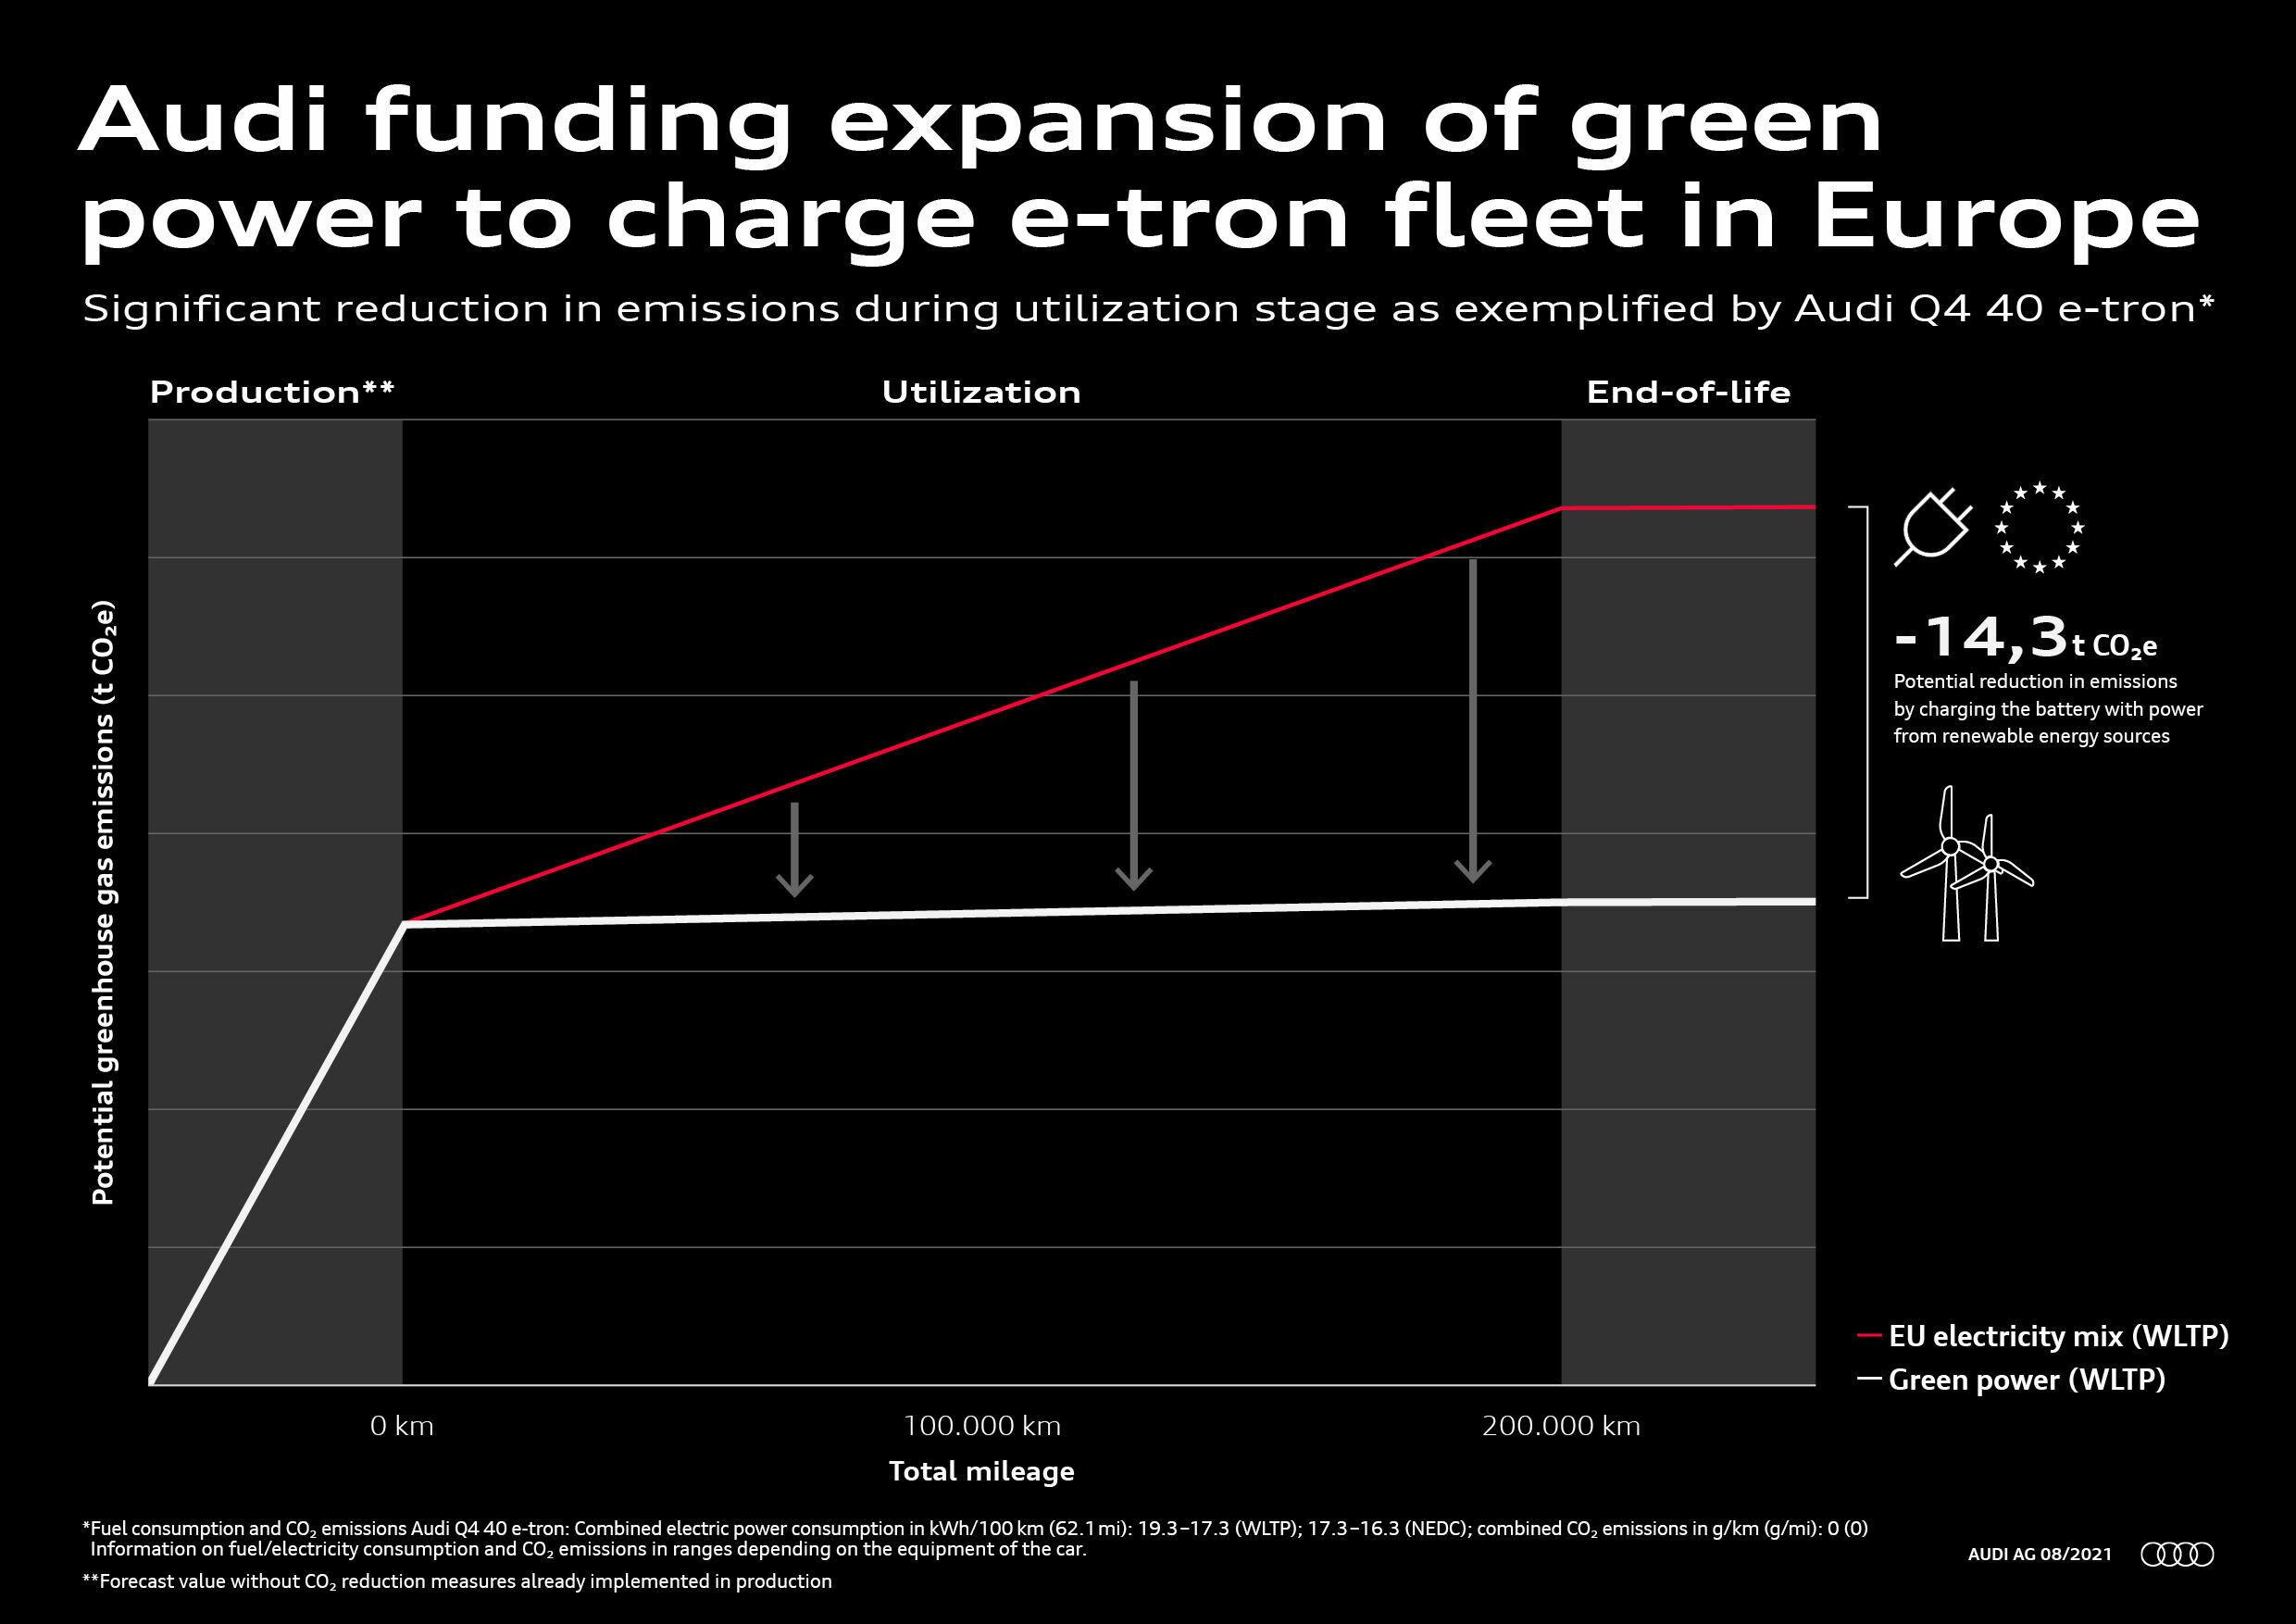 Audi funding expansion of green power to charge e-tron fleet in Europe